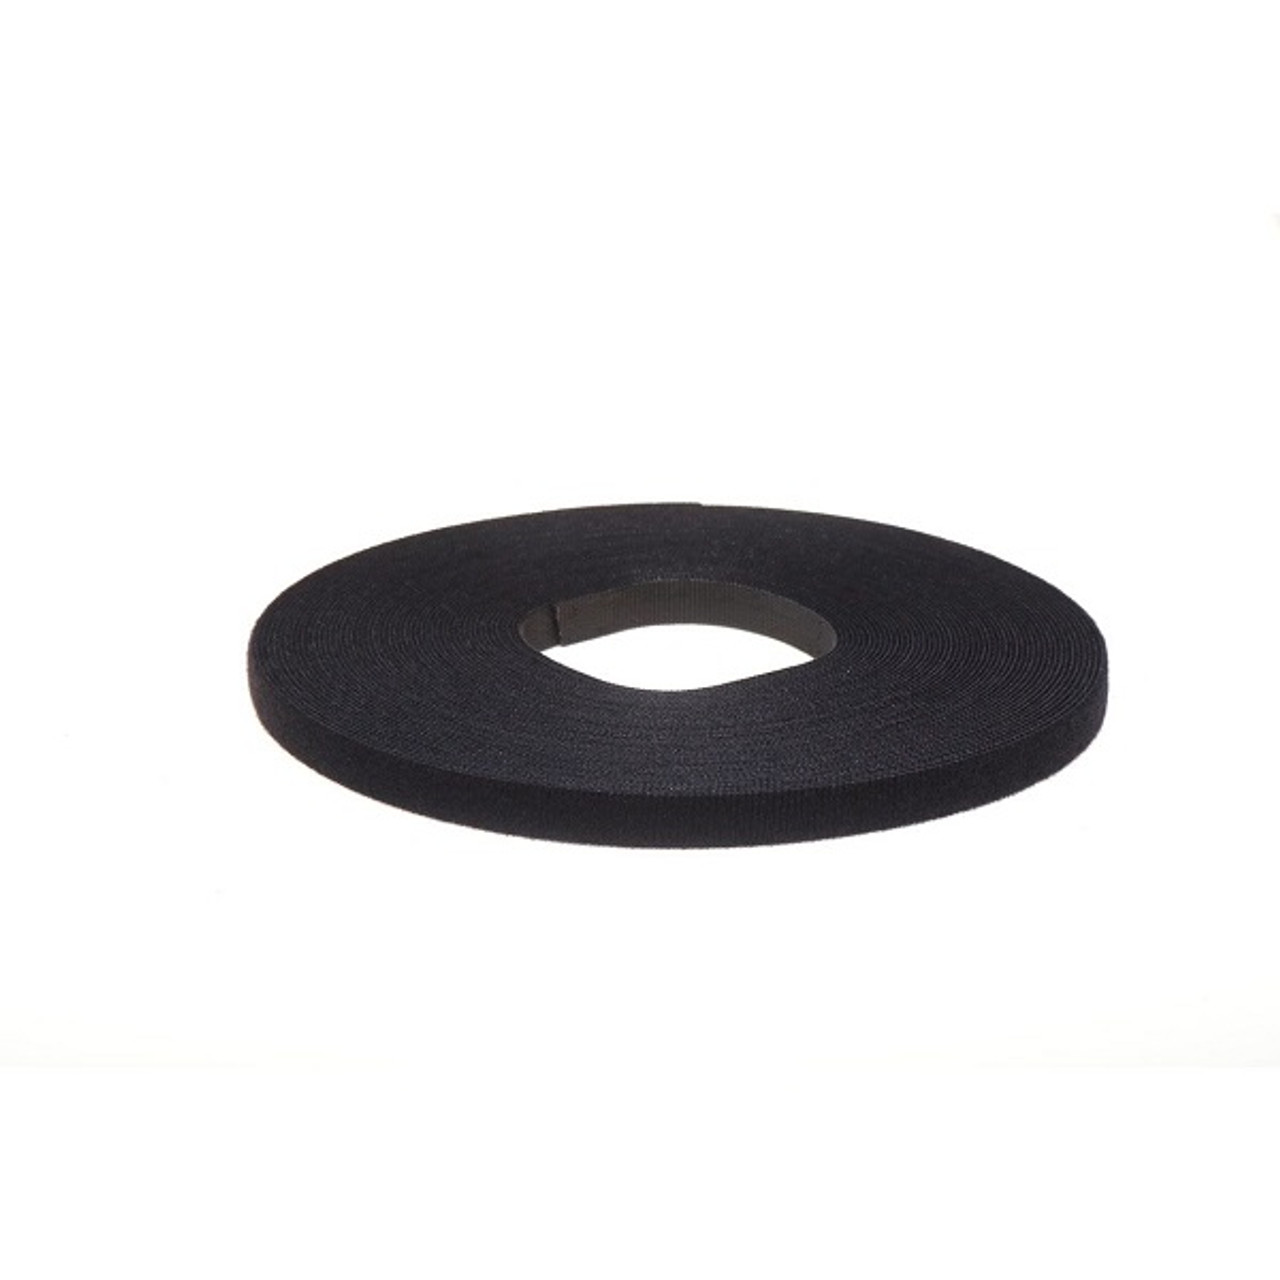 20 Sets Black Velcro Strips Velcro Tapes with Adhesive Hook and